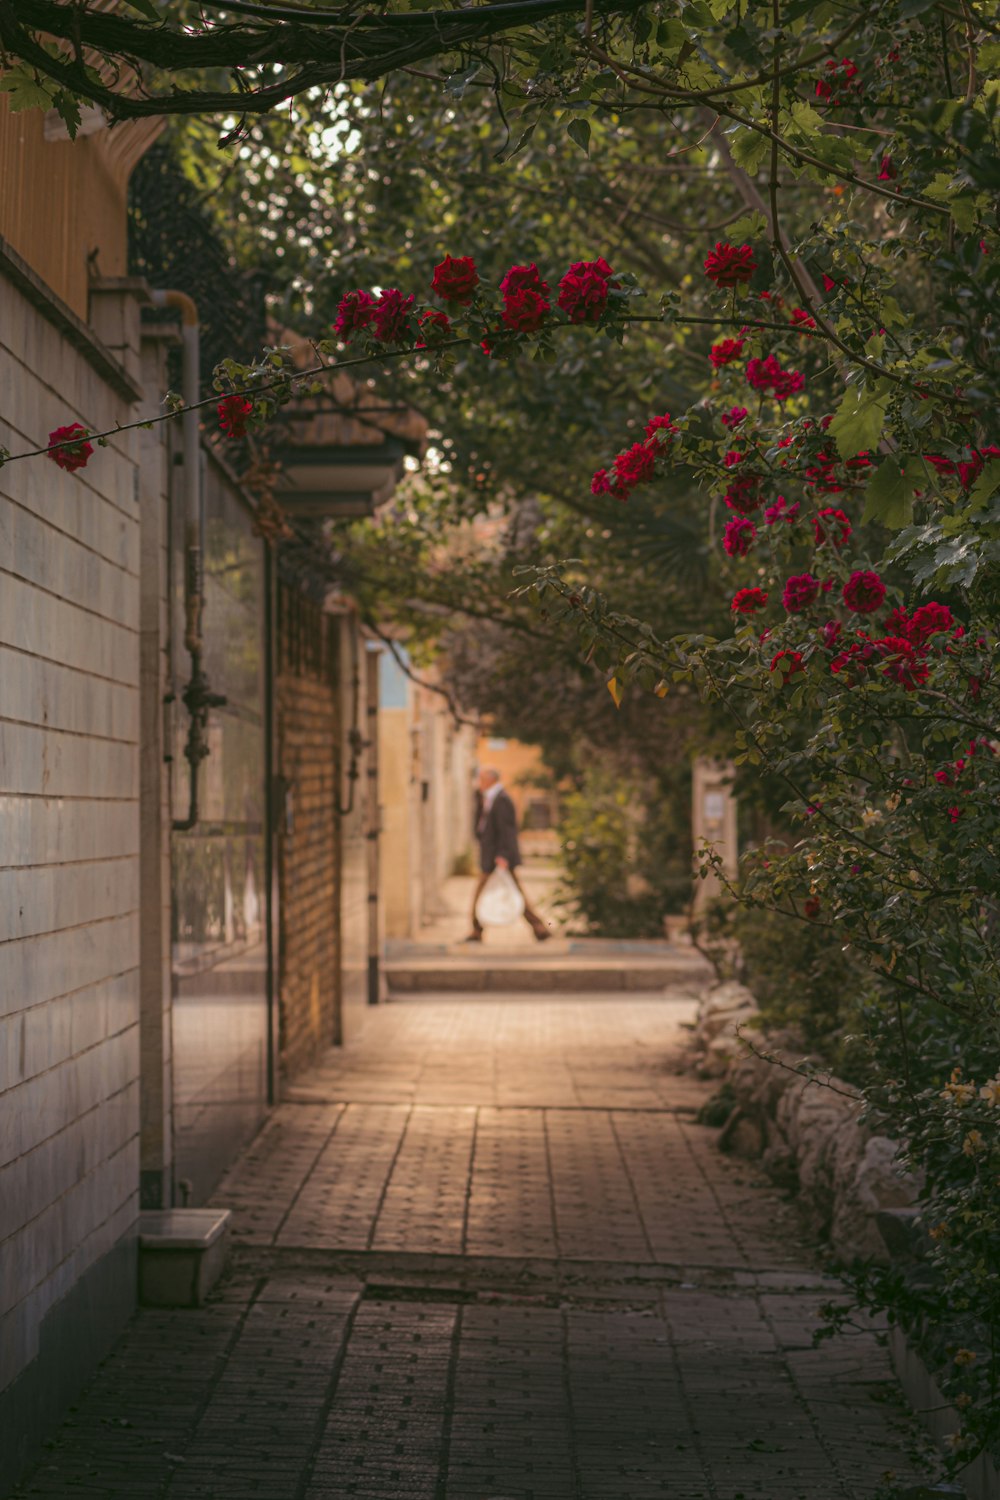 a person walking down a sidewalk with red flowers on it